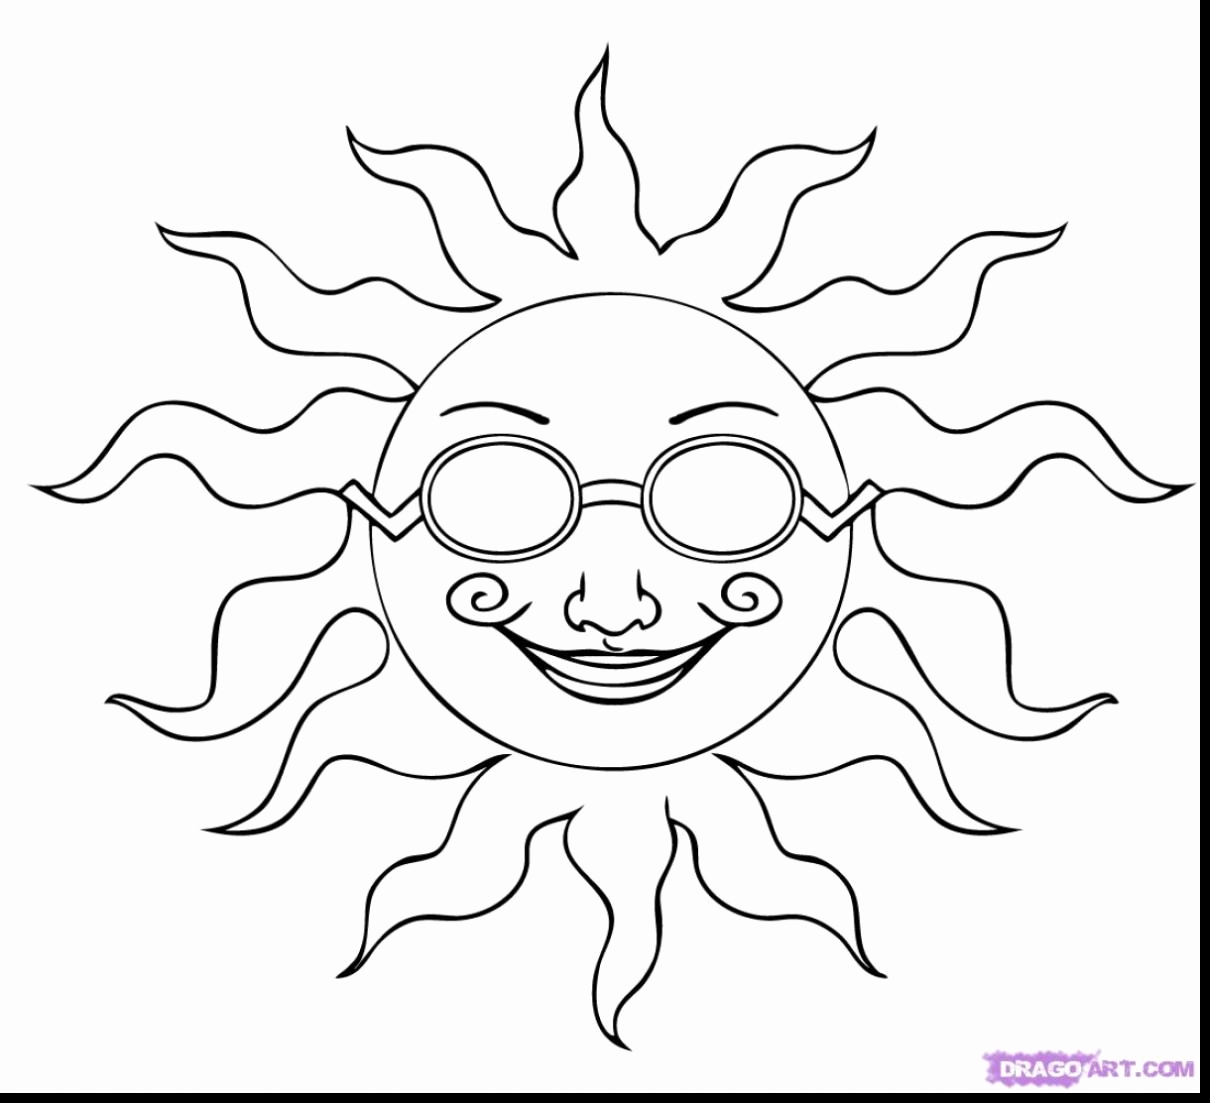 Sun Moon Stars Coloring Pages at GetColoringscom Free